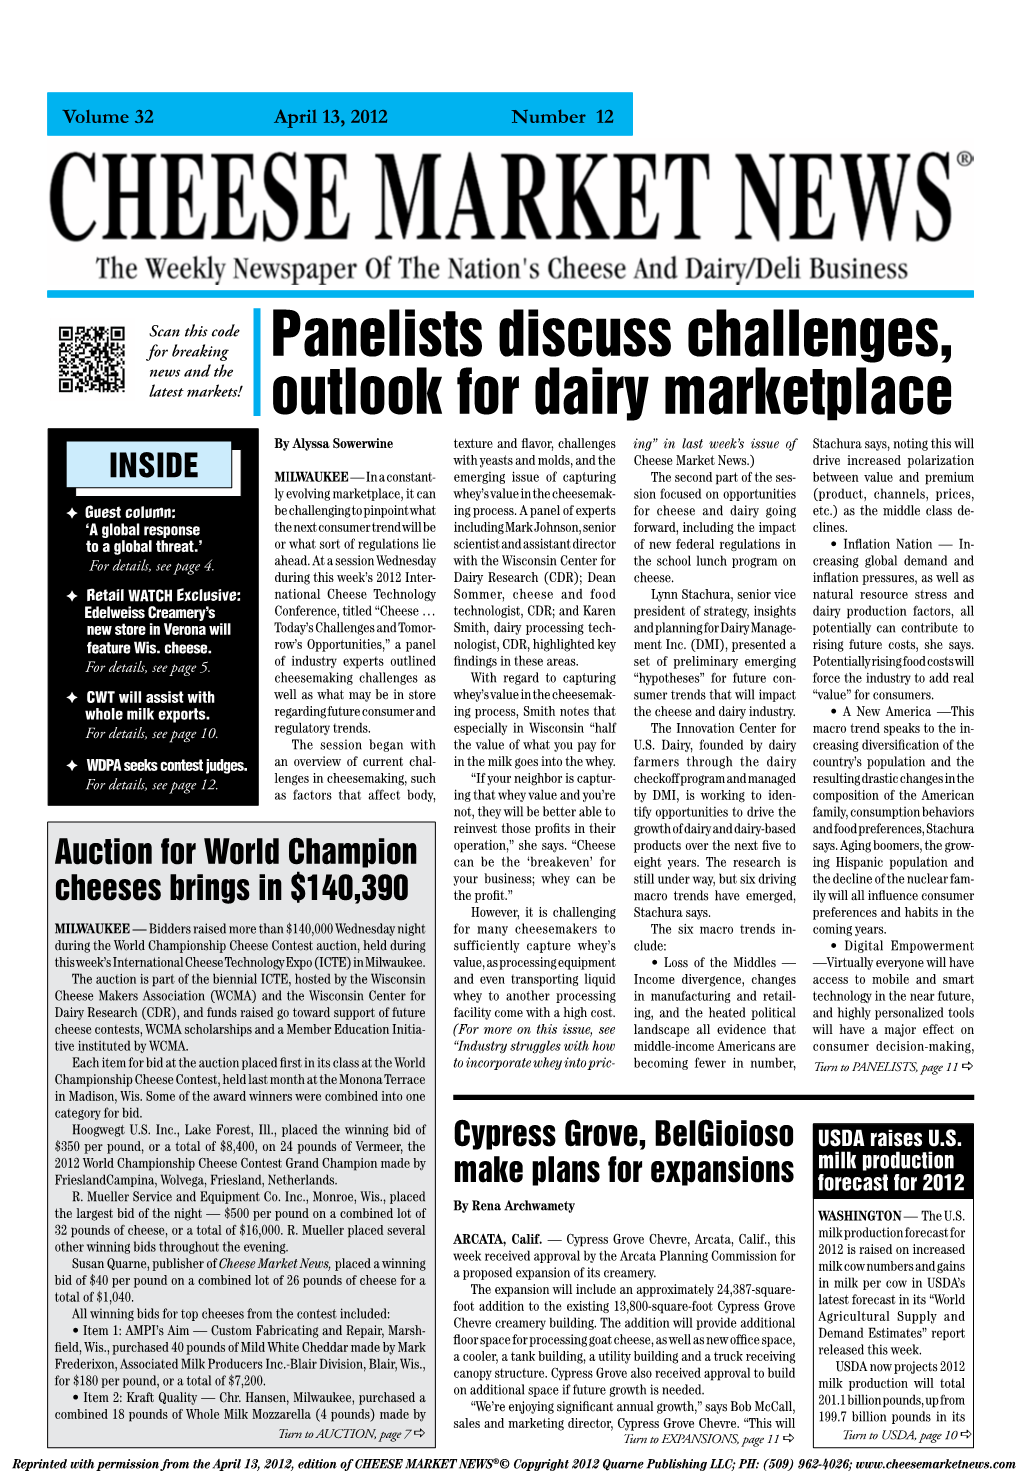 Panelists Discuss Challenges, Outlook for Dairy